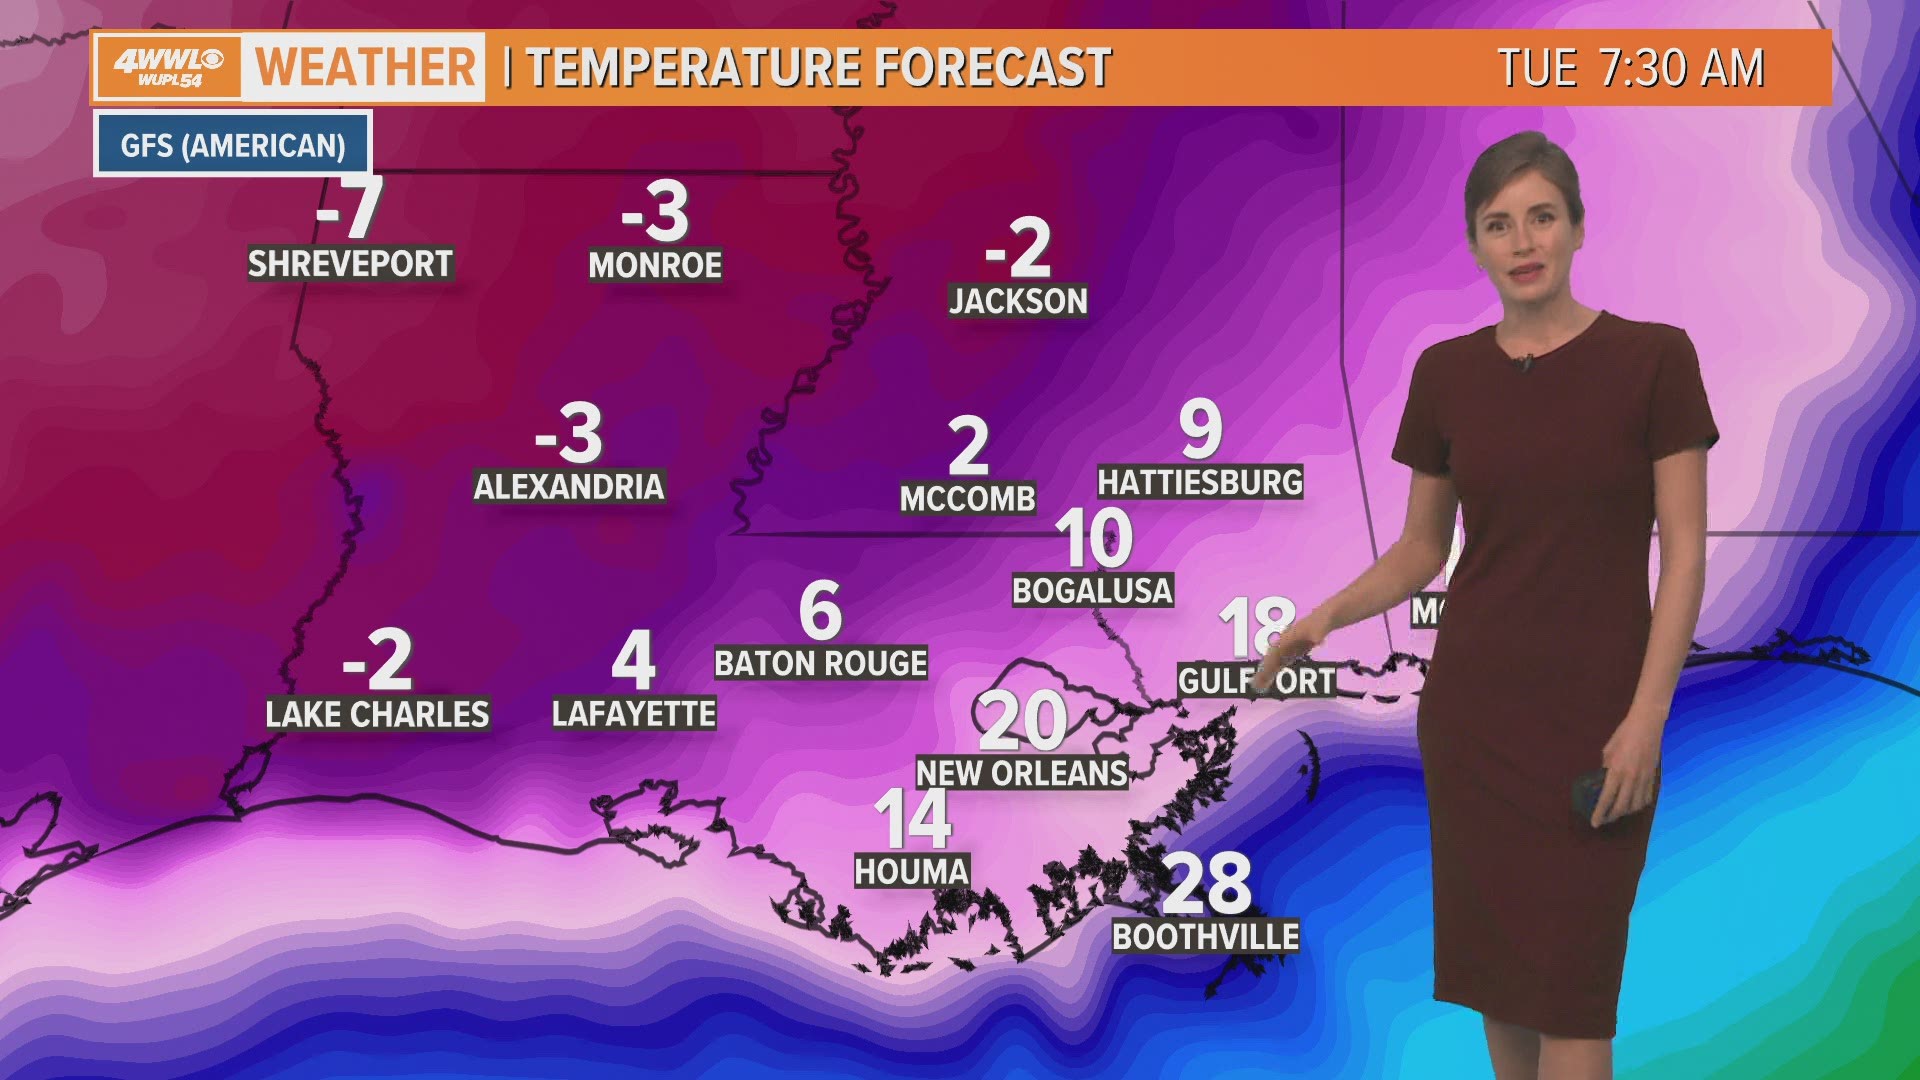 The coldest air this week could arrive just before Mardi Gras. Meteorologist Alexandra Cranford breaks down the timing in her forecast on Wednesday, Feb. 10, 2021.